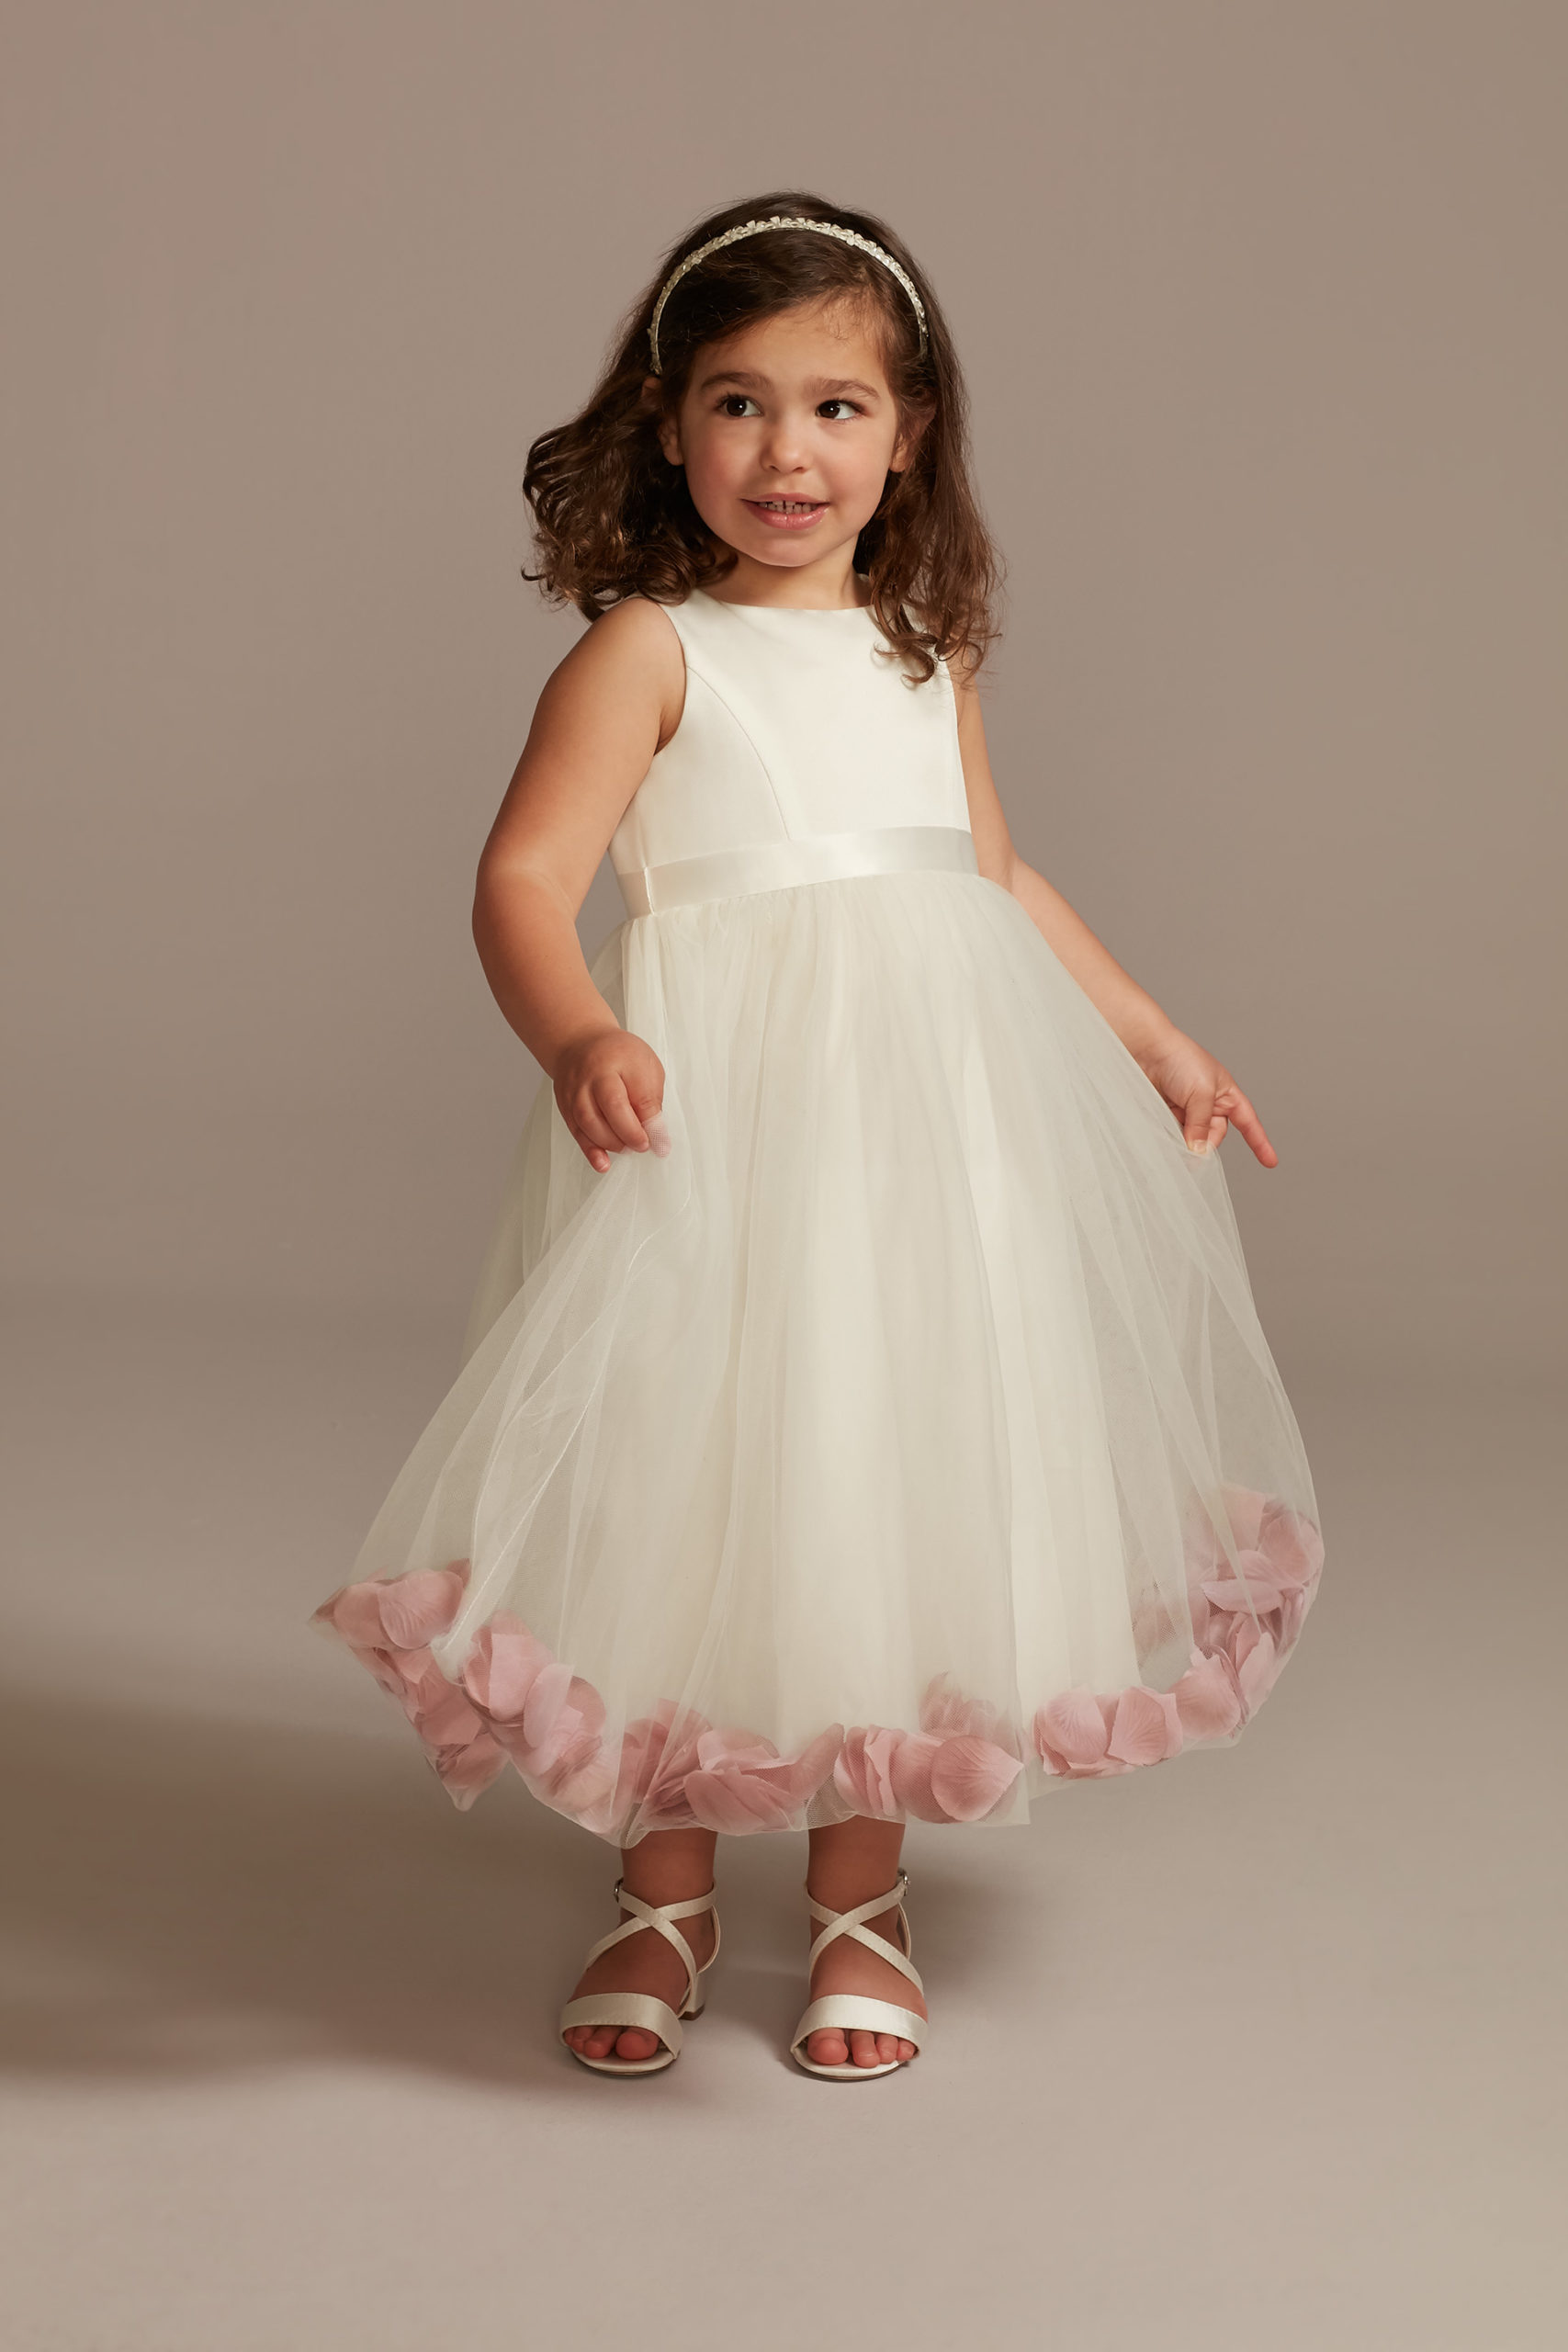 Lovebay Baby Grils Pearl Tulle Princess Dress Birthday Wedding Gown Dresses  for Toddler Kids 0-5 Years - Walmart.com